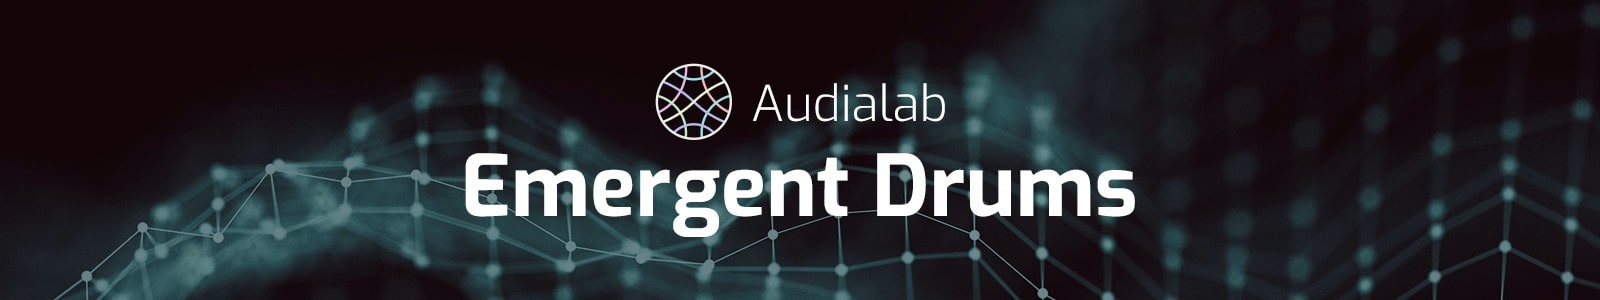 Audialab Emergent Drums